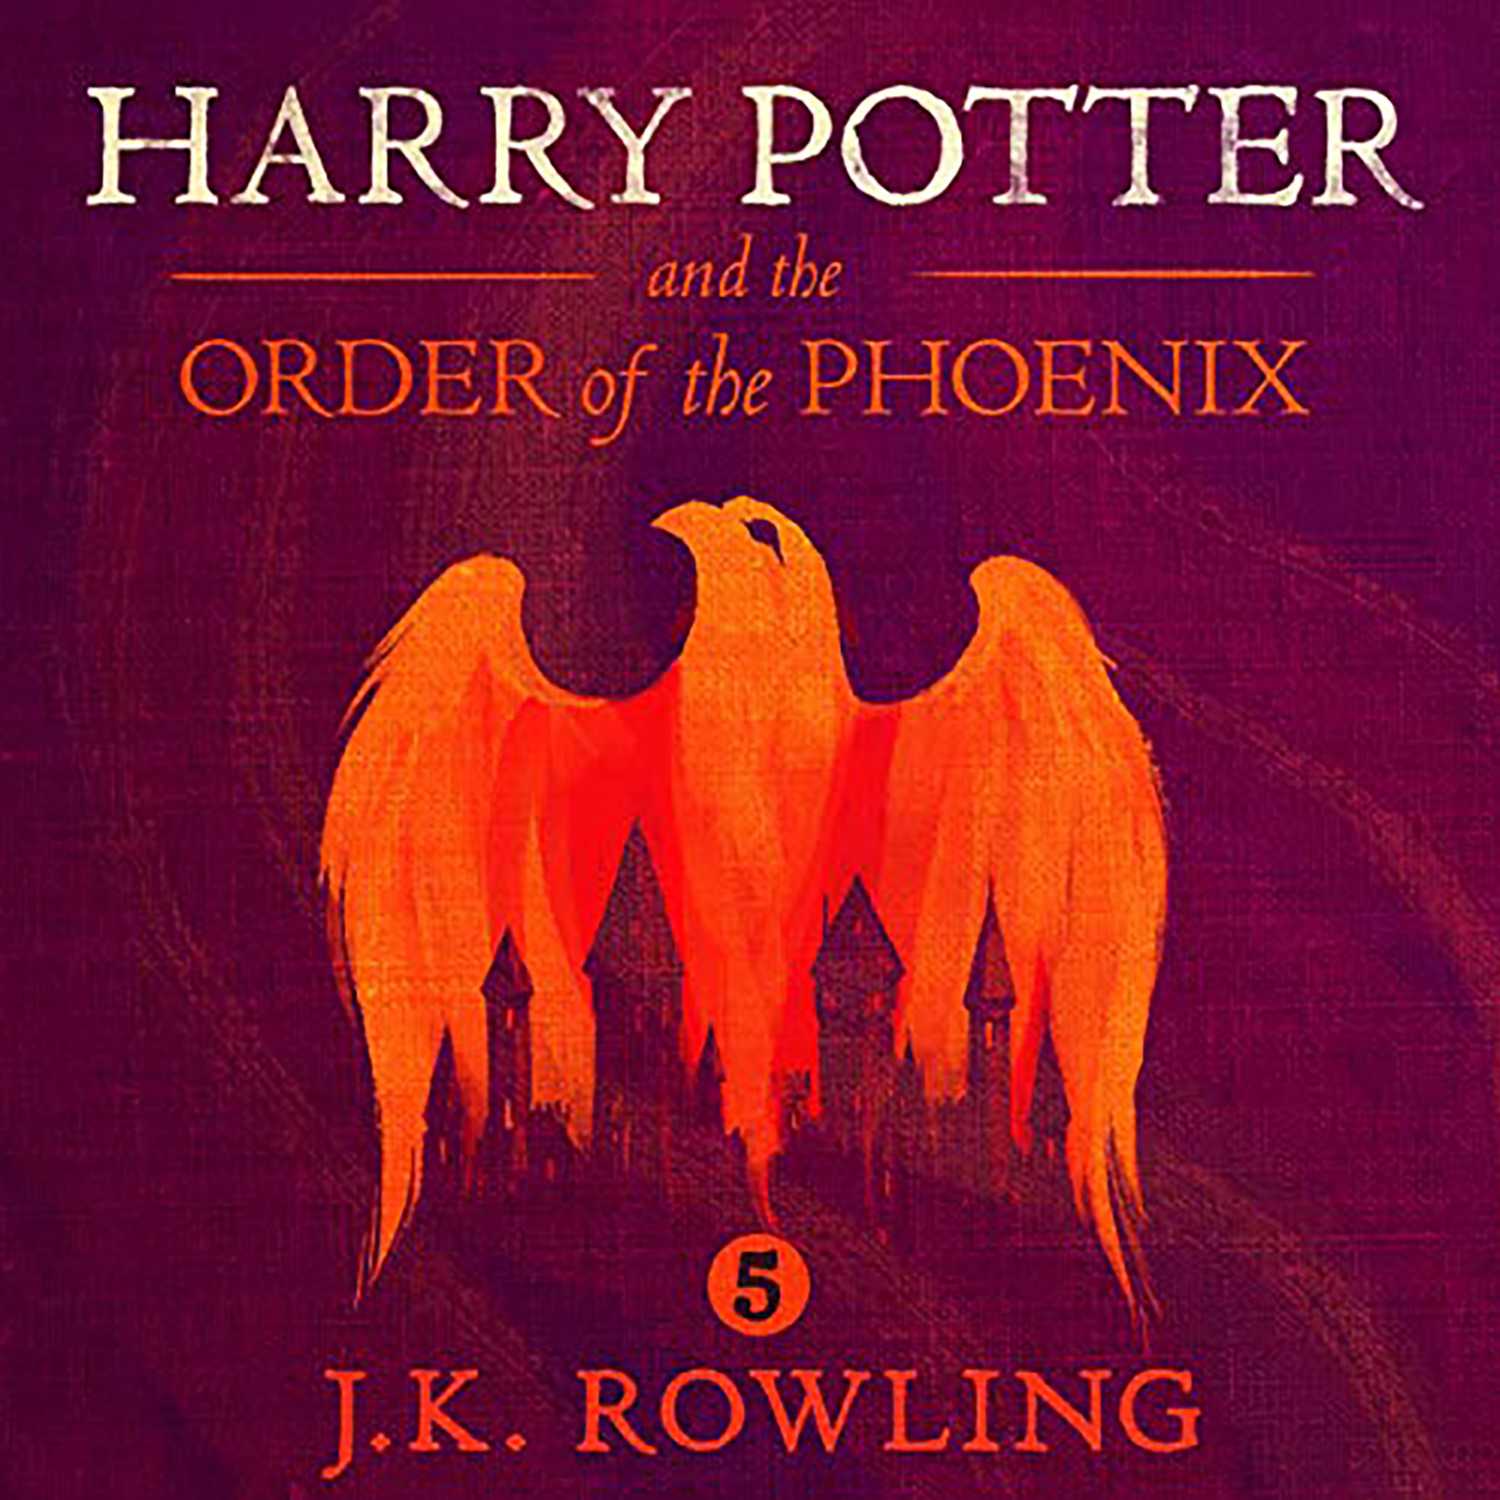 Harry Potter and the Order of the Phoenix Part 2